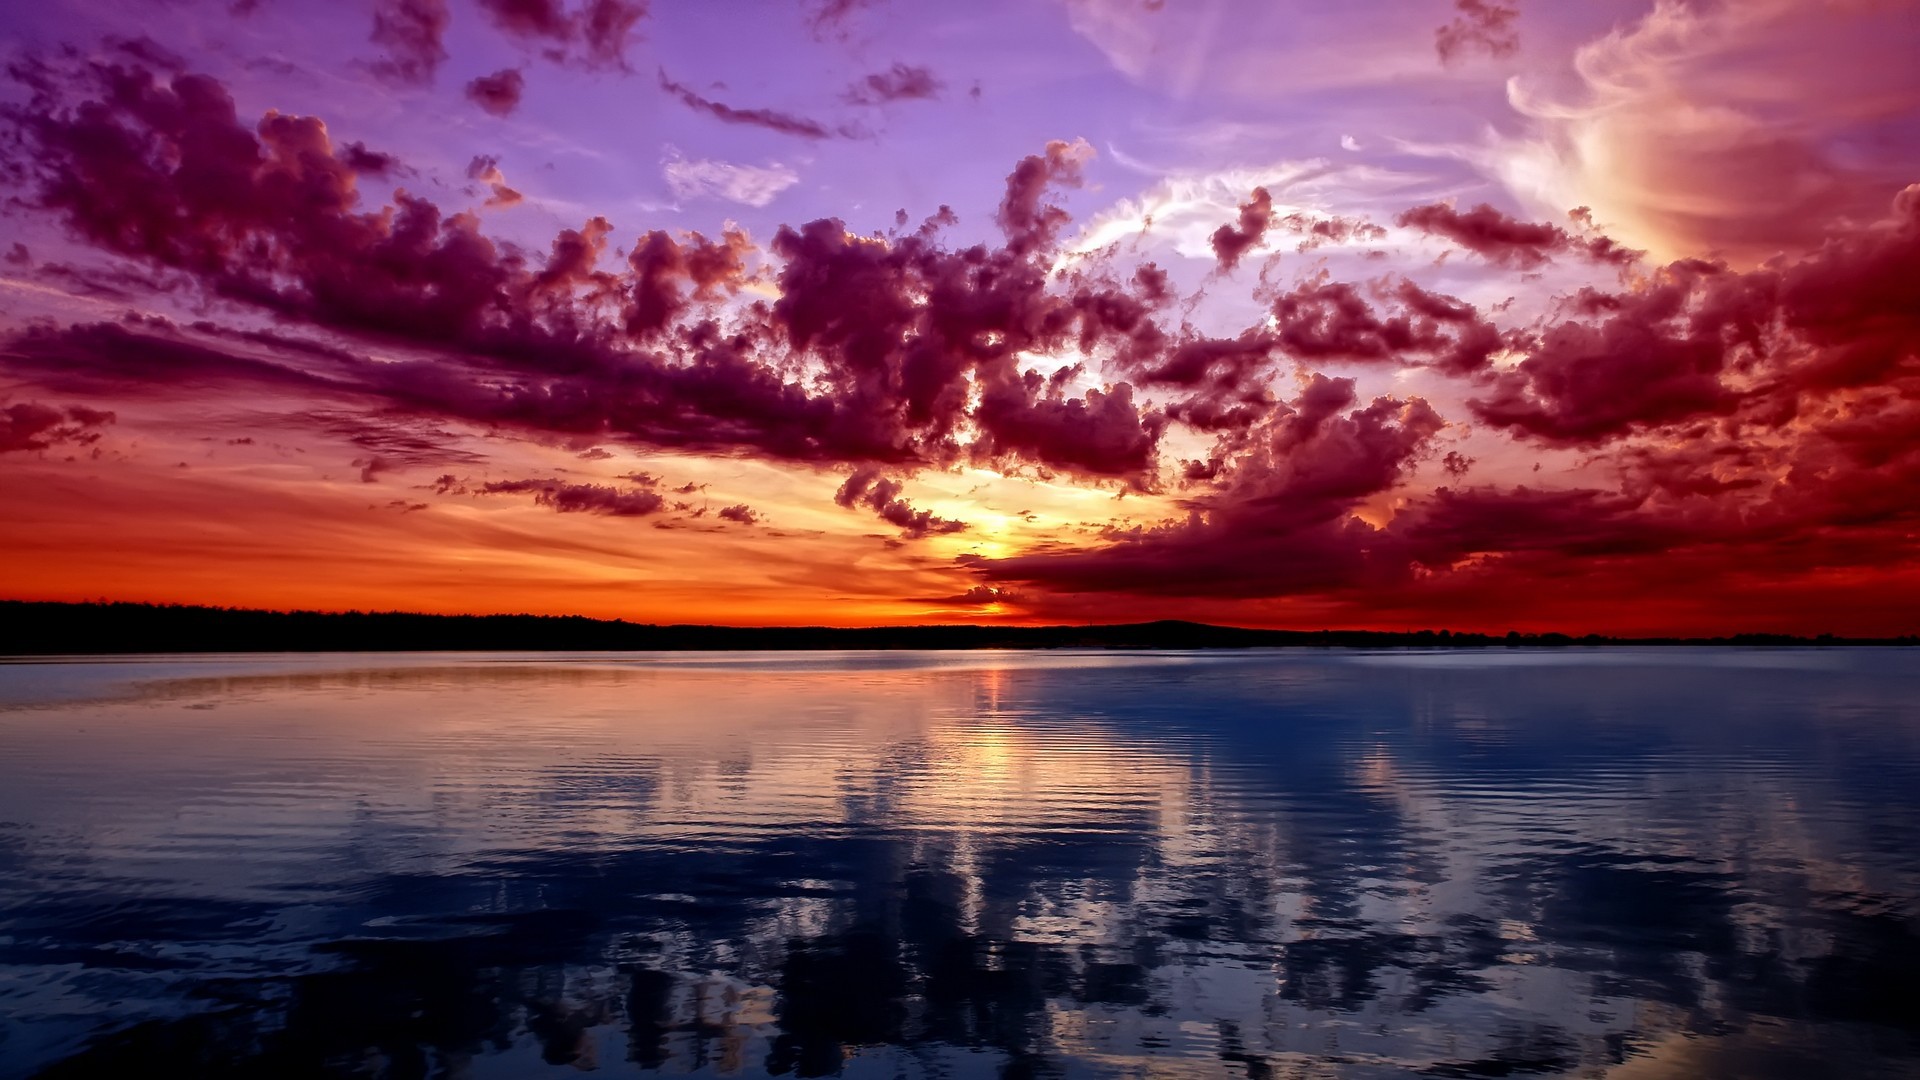 General 1920x1080 landscape HDR sunset beach sunlight clouds sky water reflection